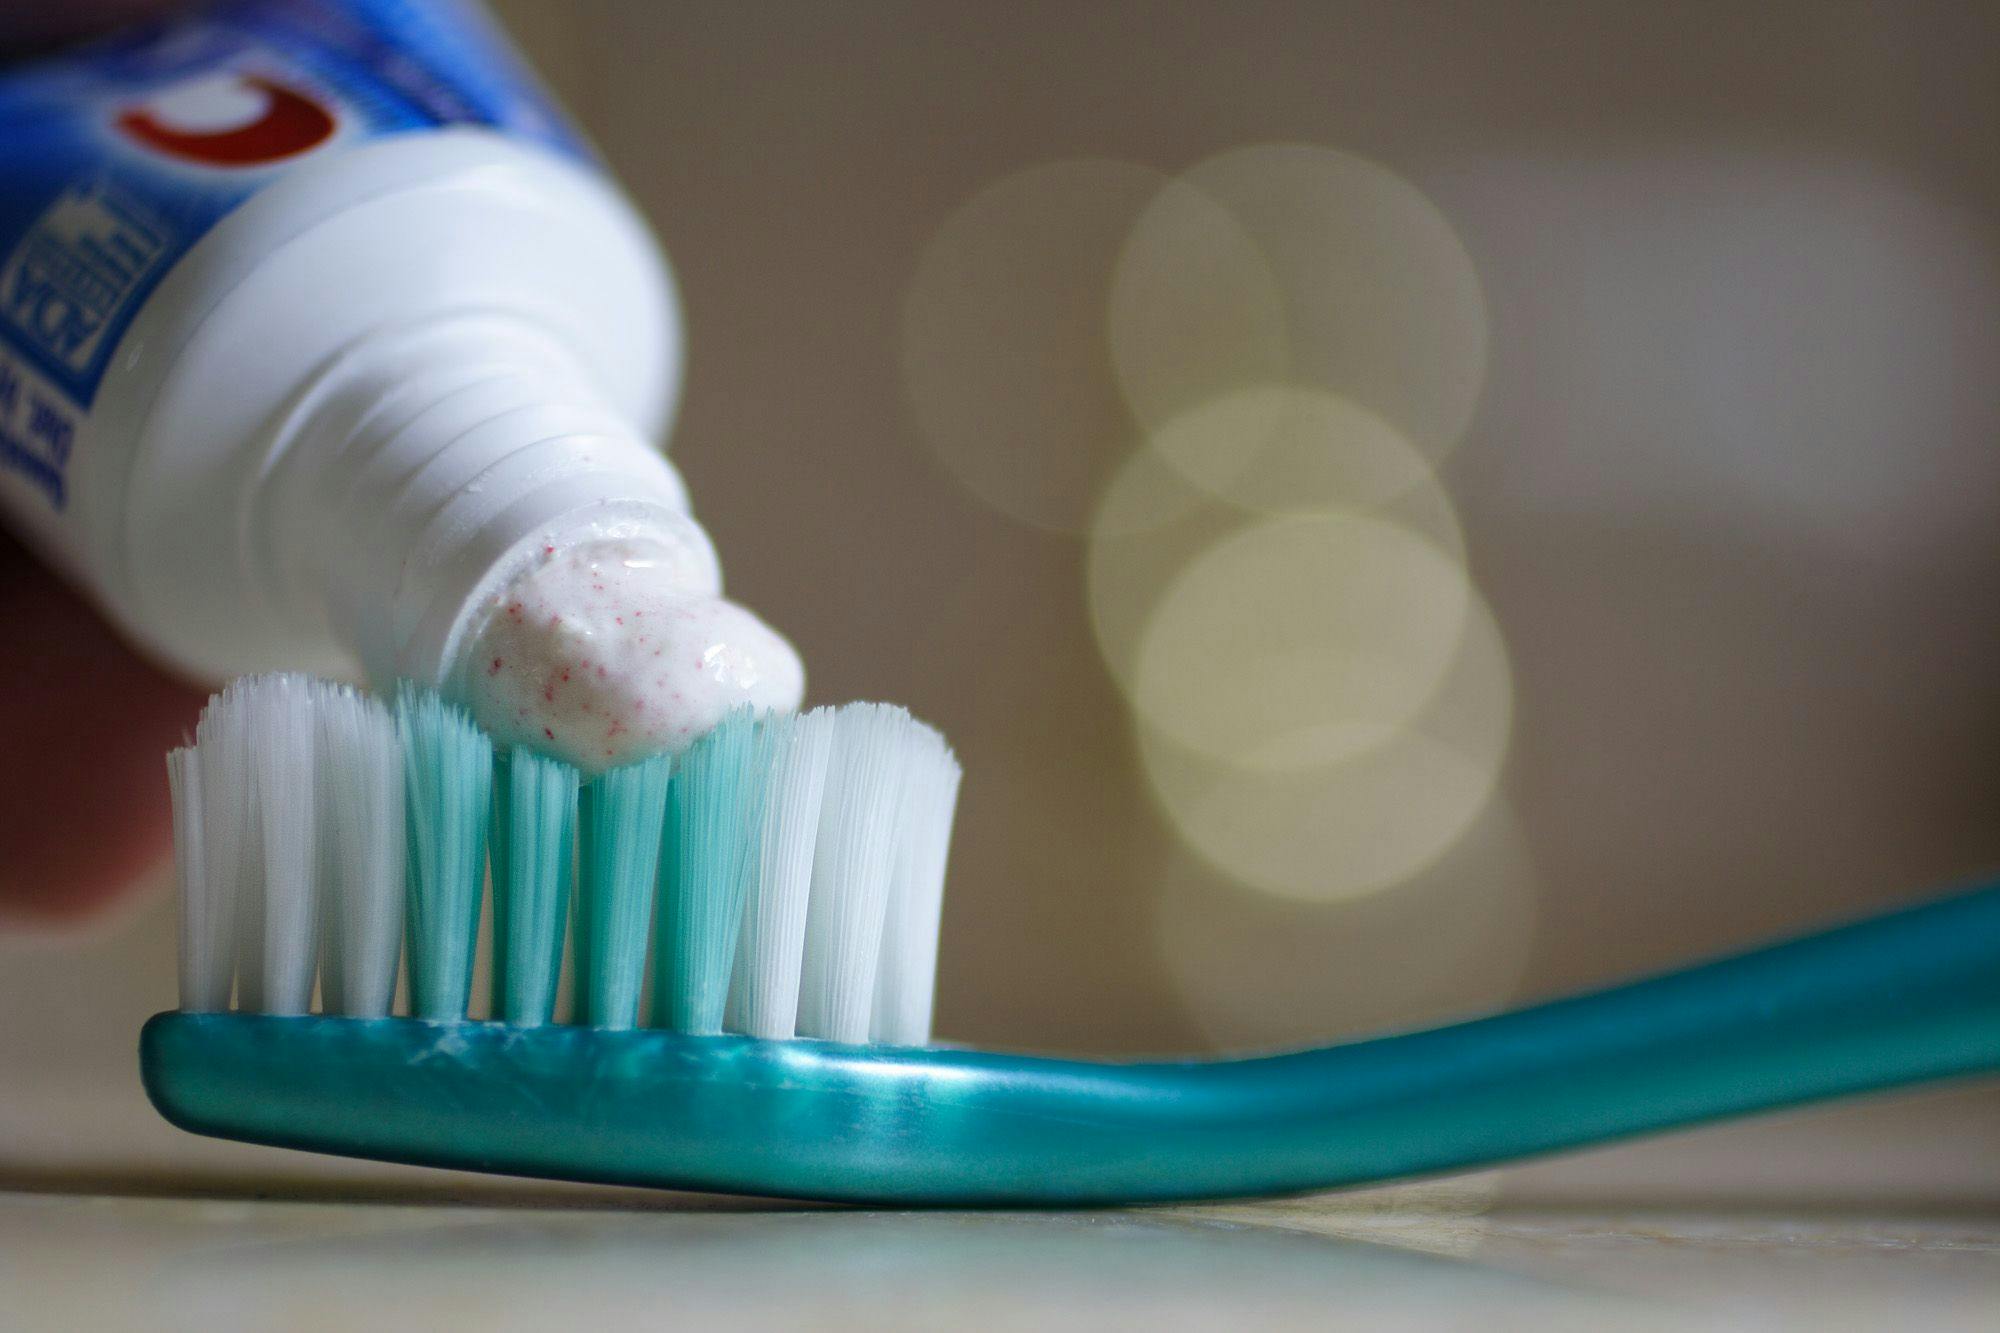 Study Finds Poor Oral Health May Impact COVID-19 Severity, Specifically for Cardiac Patients